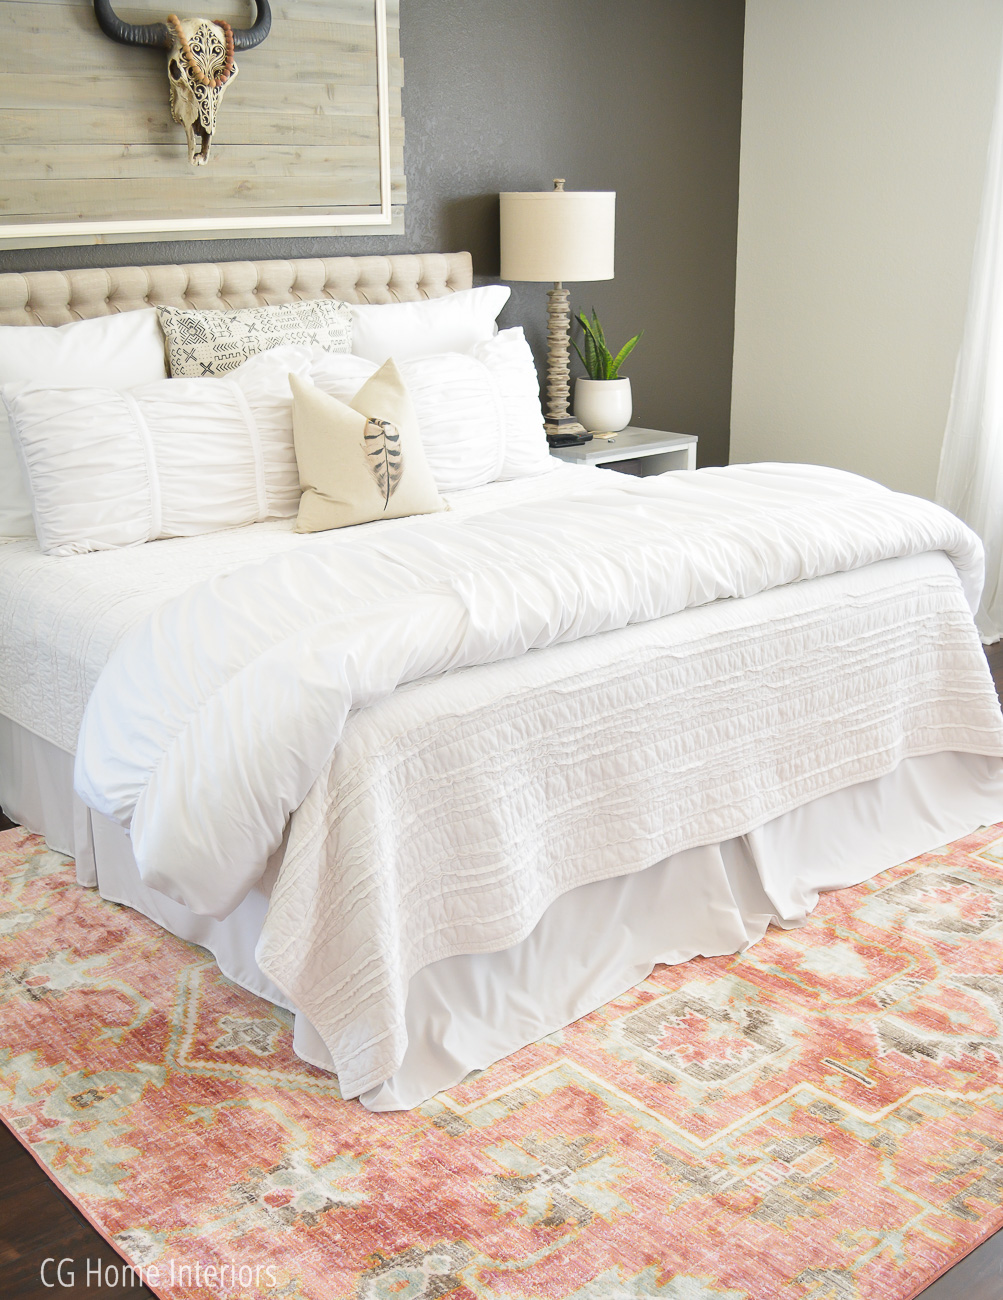 How to keep white bedding white with ingredients you have on hand